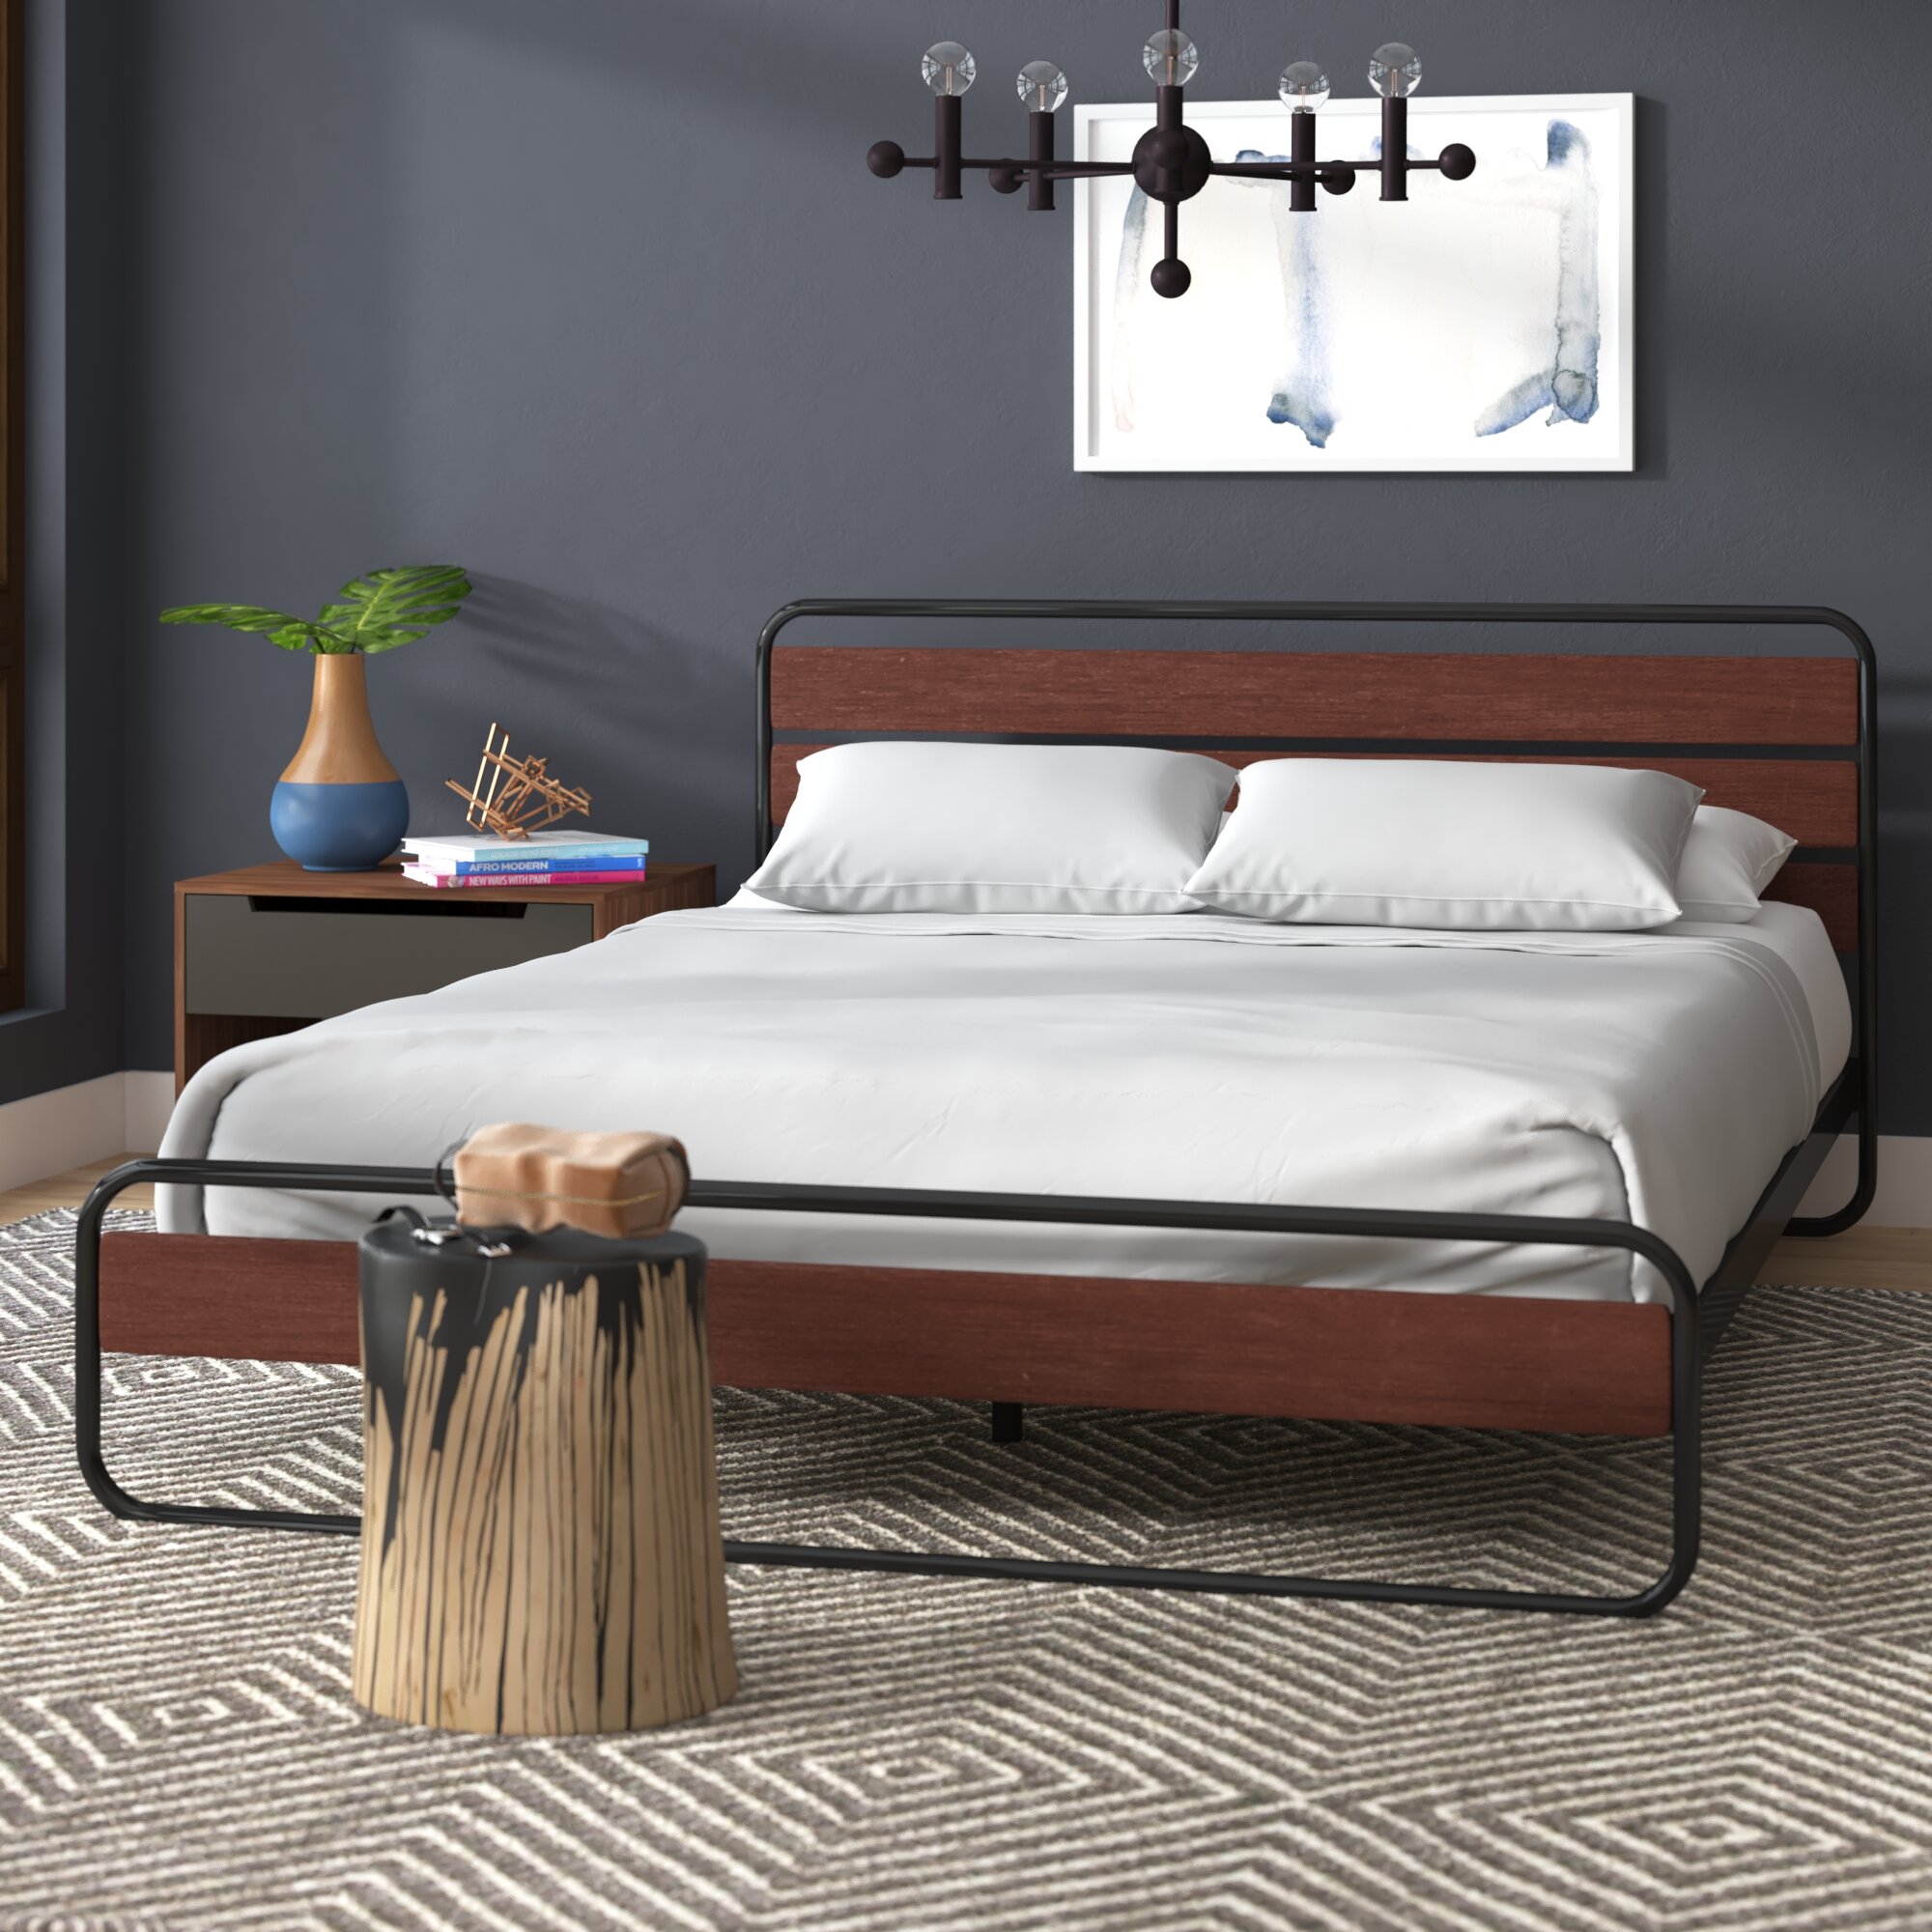 Wayfair | Industrial King Size Beds You'll Love in 2022